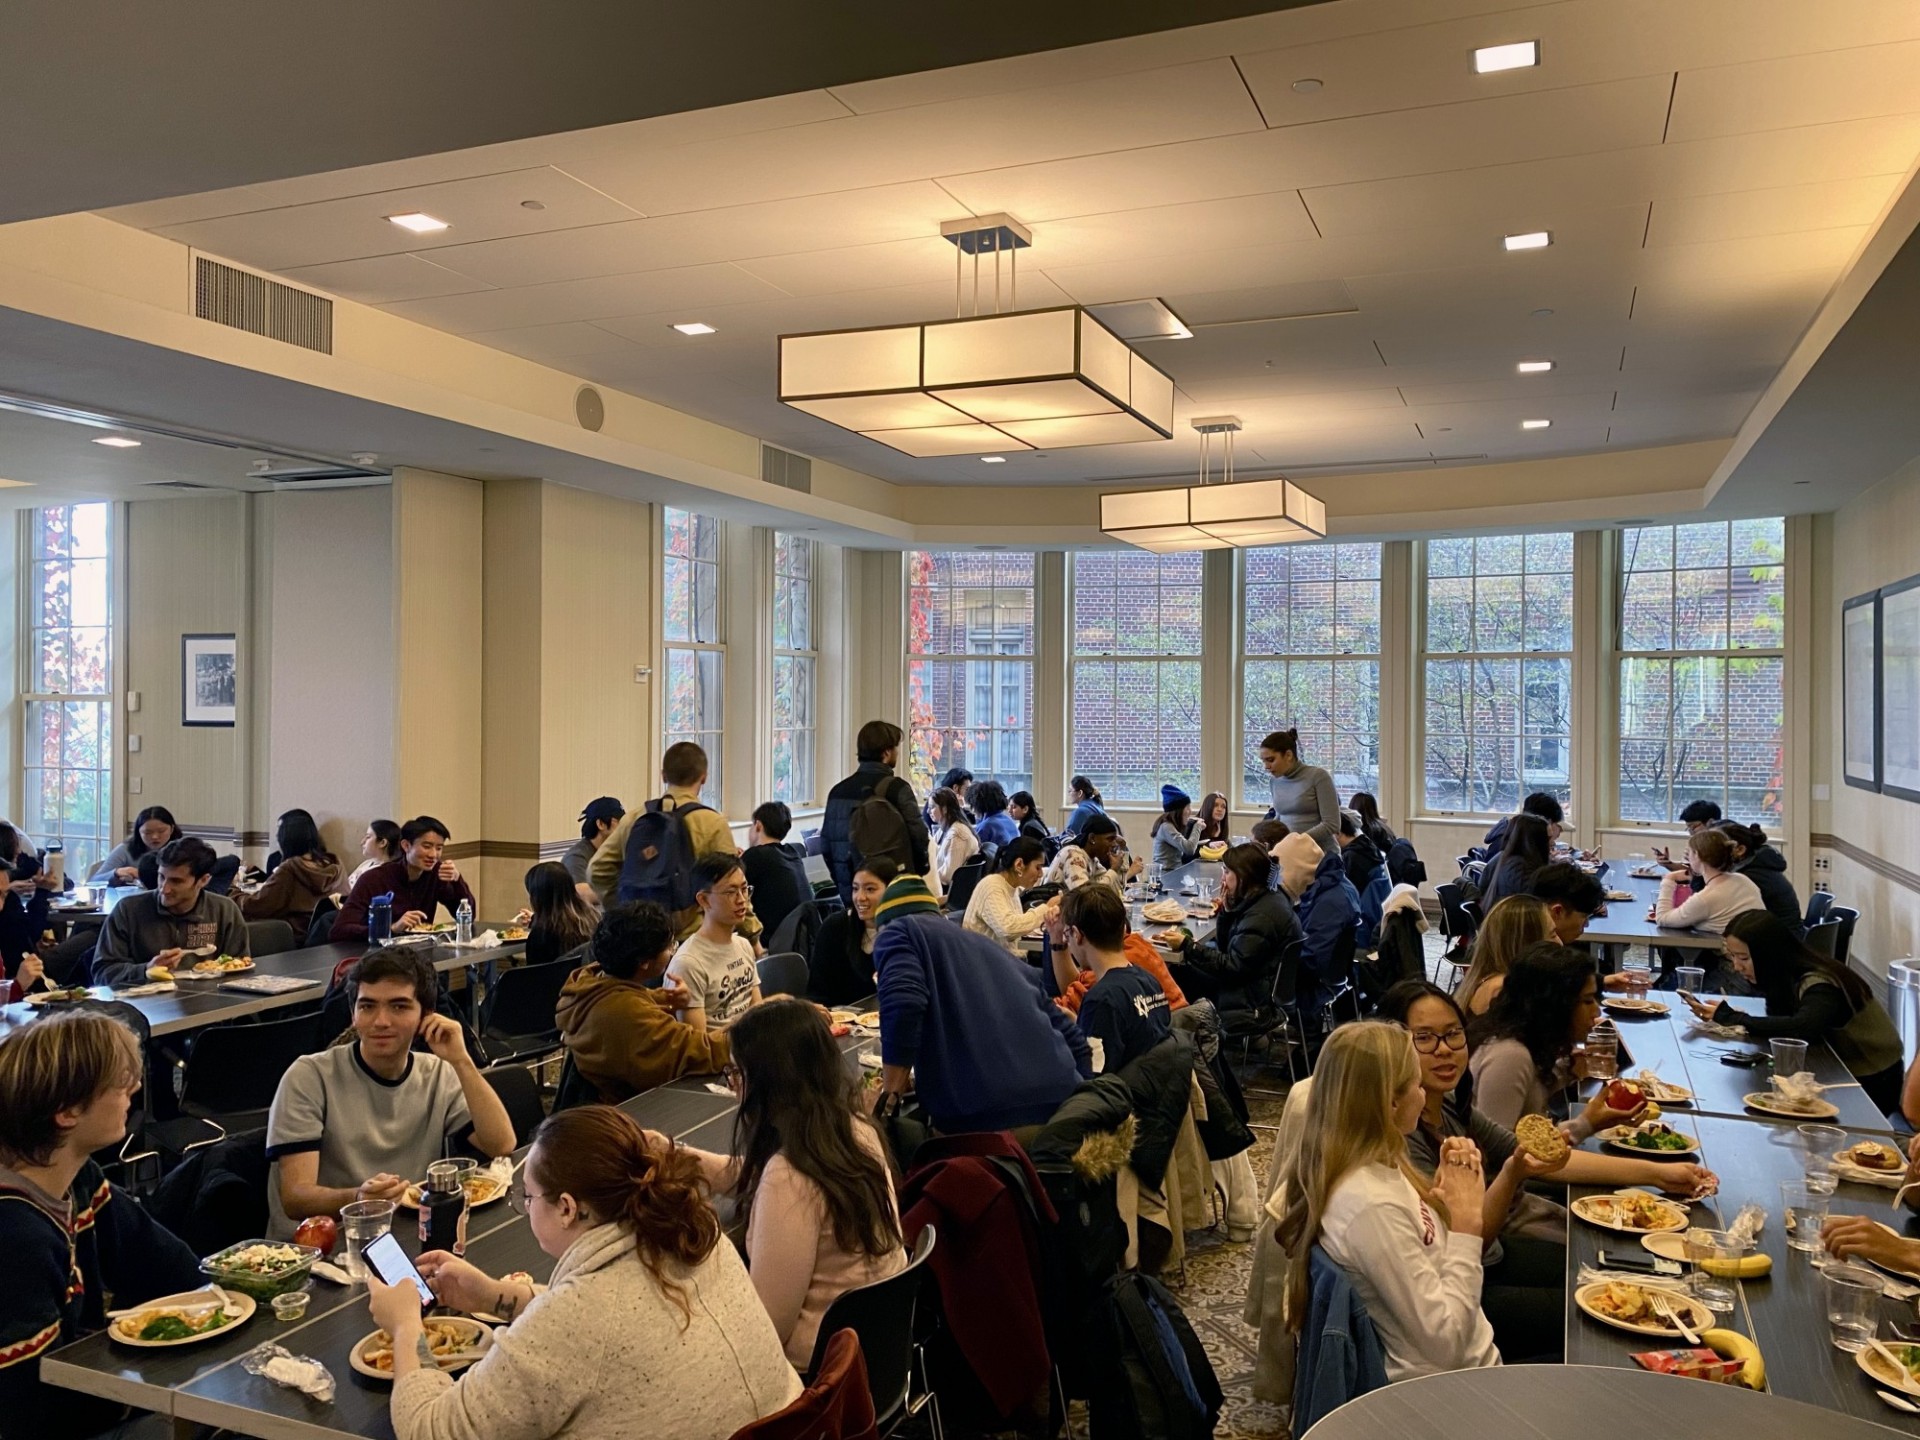 Students eating lunch in the Faculty House dining room